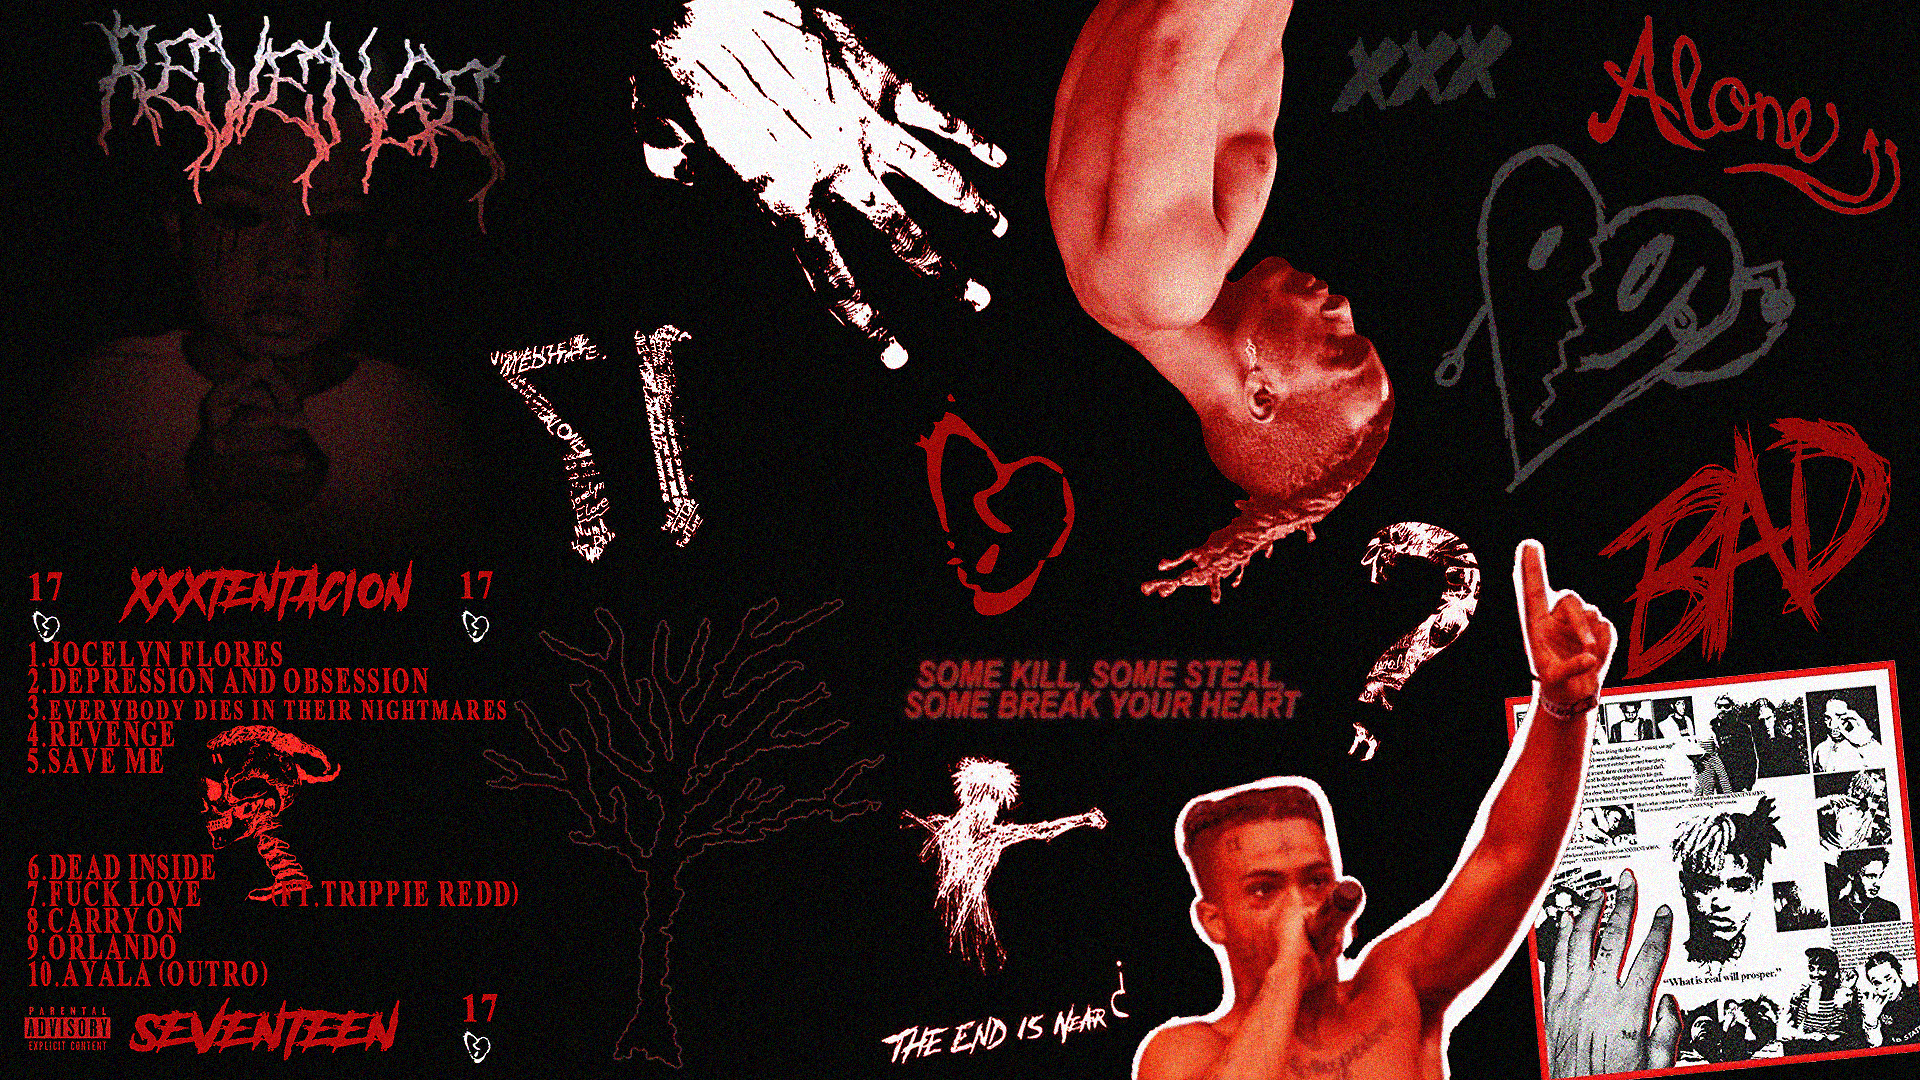 X desktop wallpaper it for personal use but thought i'd share: XXXTENTACION